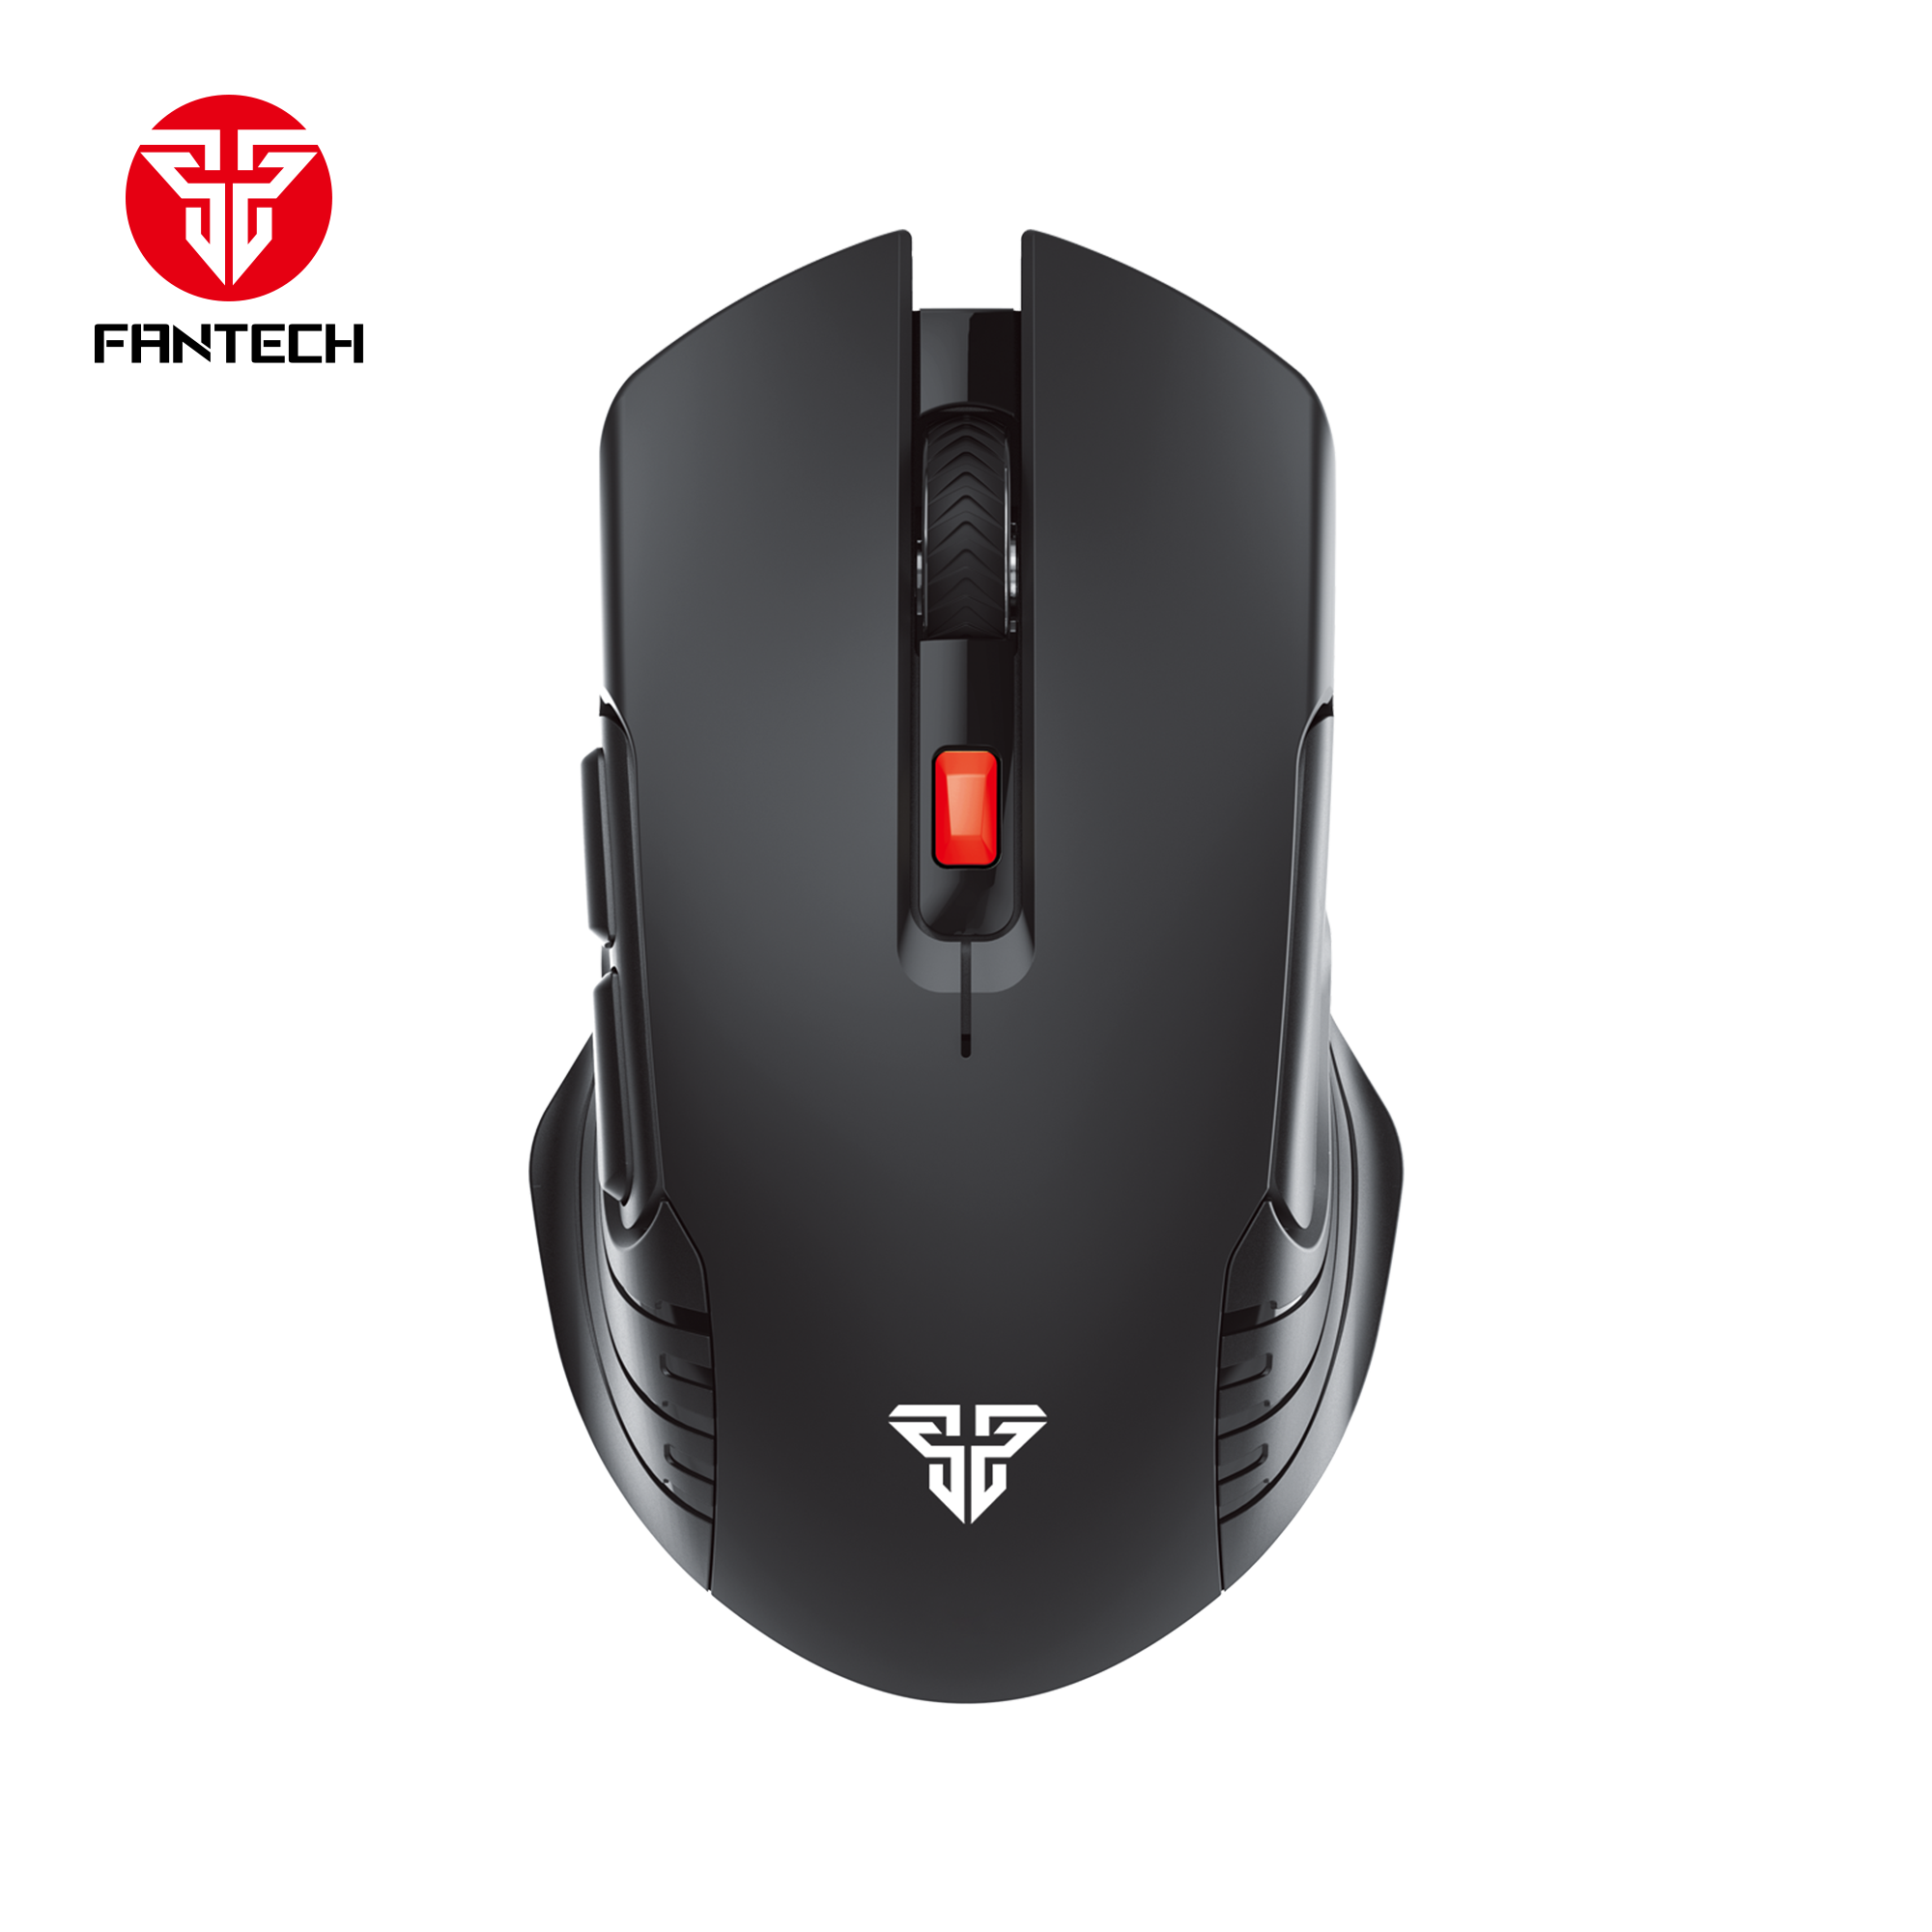 Fantech Raigor III WG12 Gaming Mouse With 2.4GHz Wireless Connection JOD 12